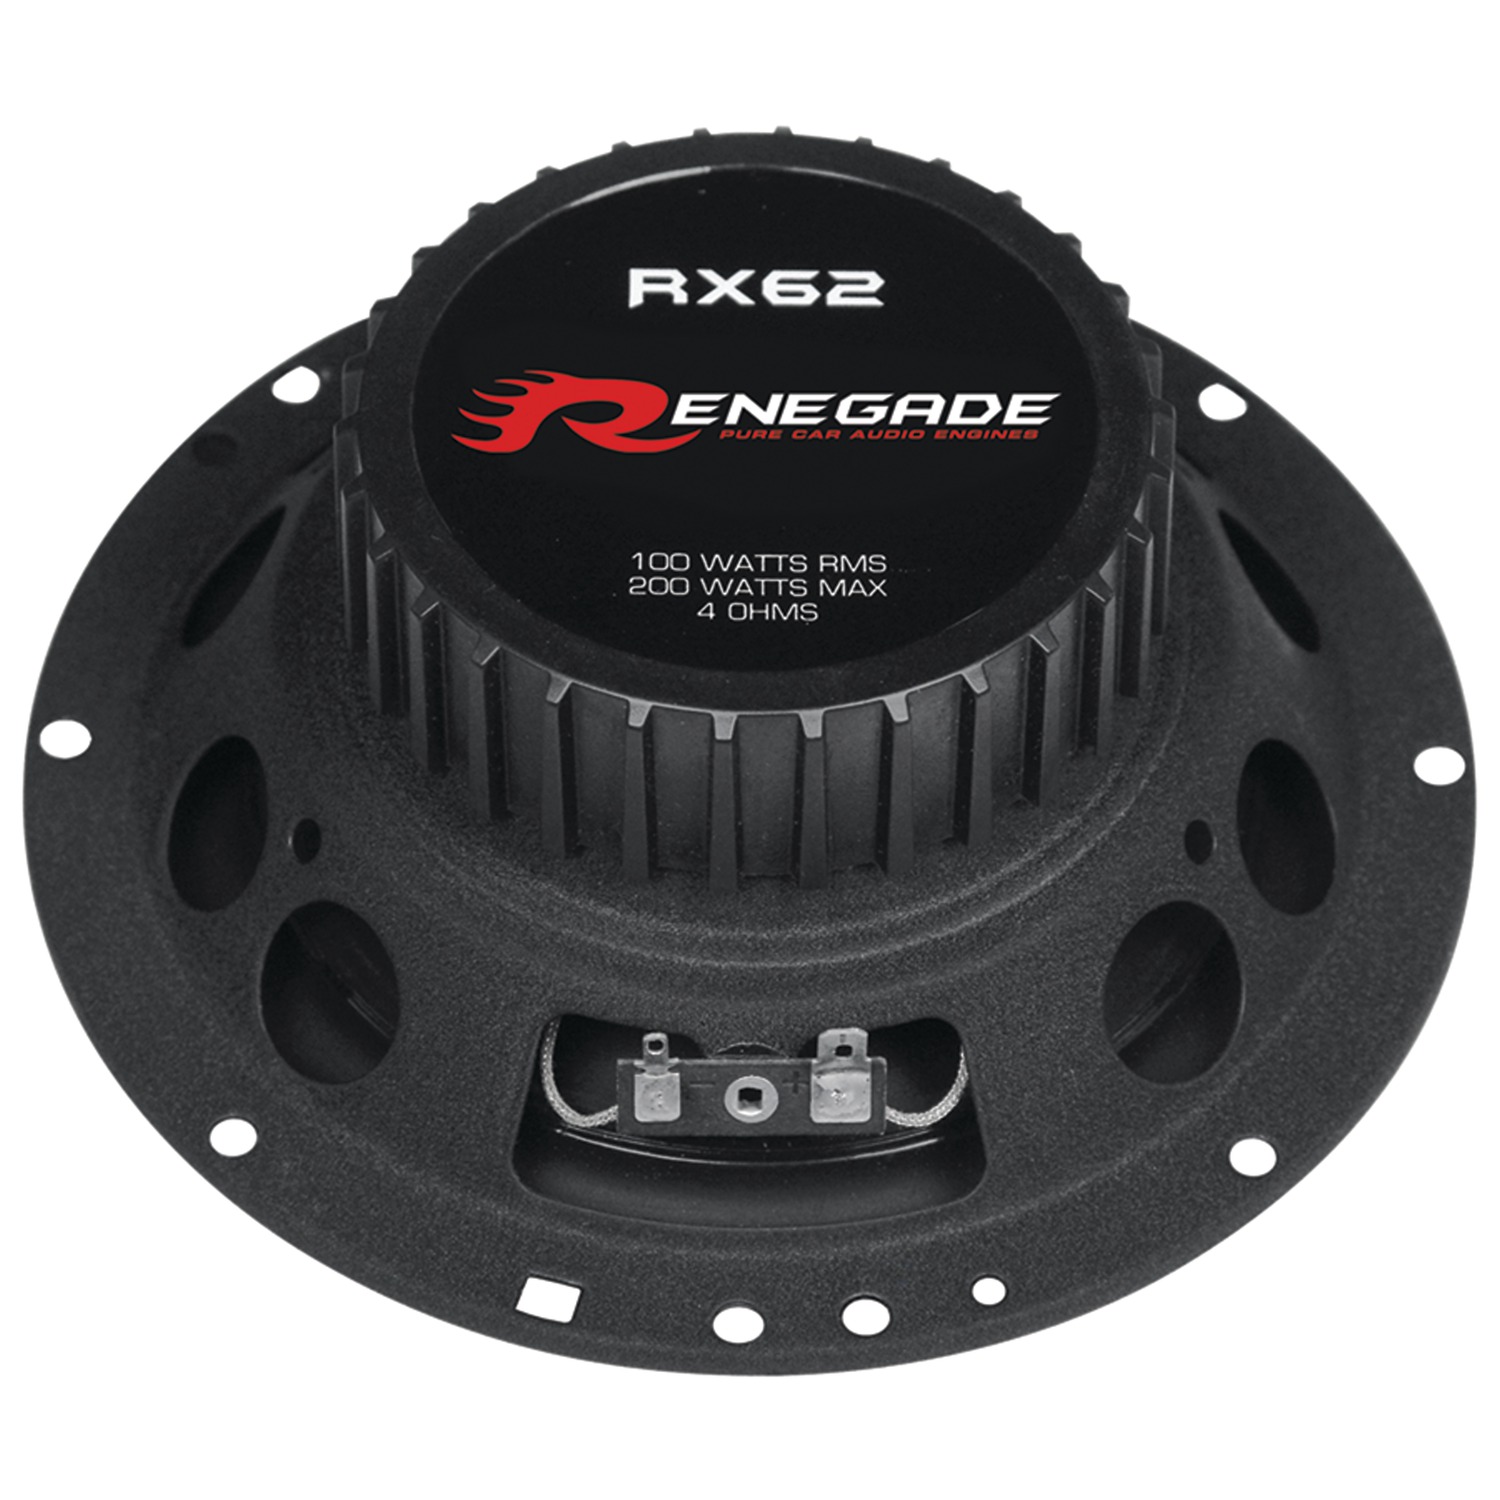 Renegade Rx62 Rx Series Full-range Coaxial Speakers (6.5", 2 Way) - image 4 of 5